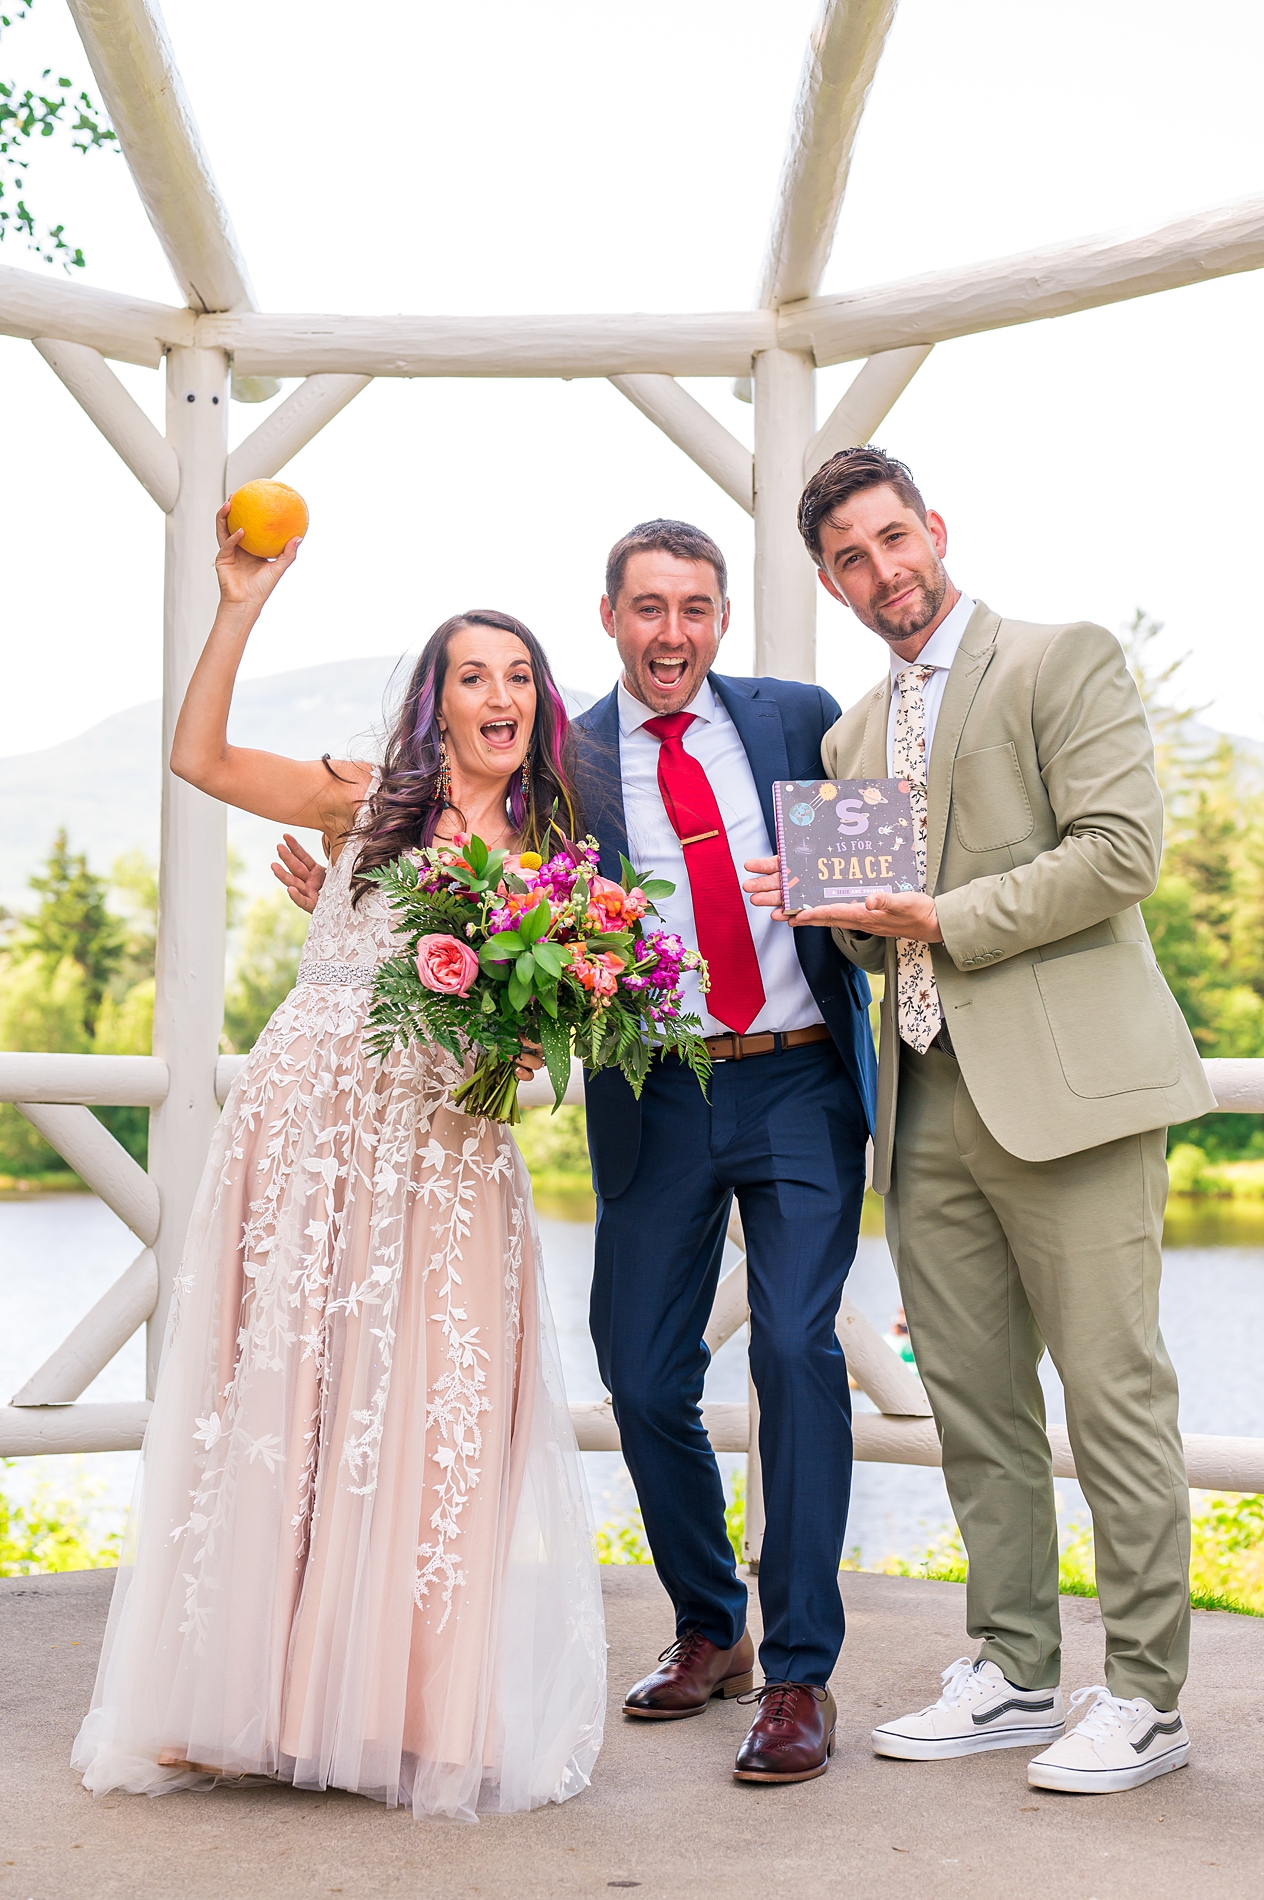 Officiant and friend gives bride and groom special gifts after wedding